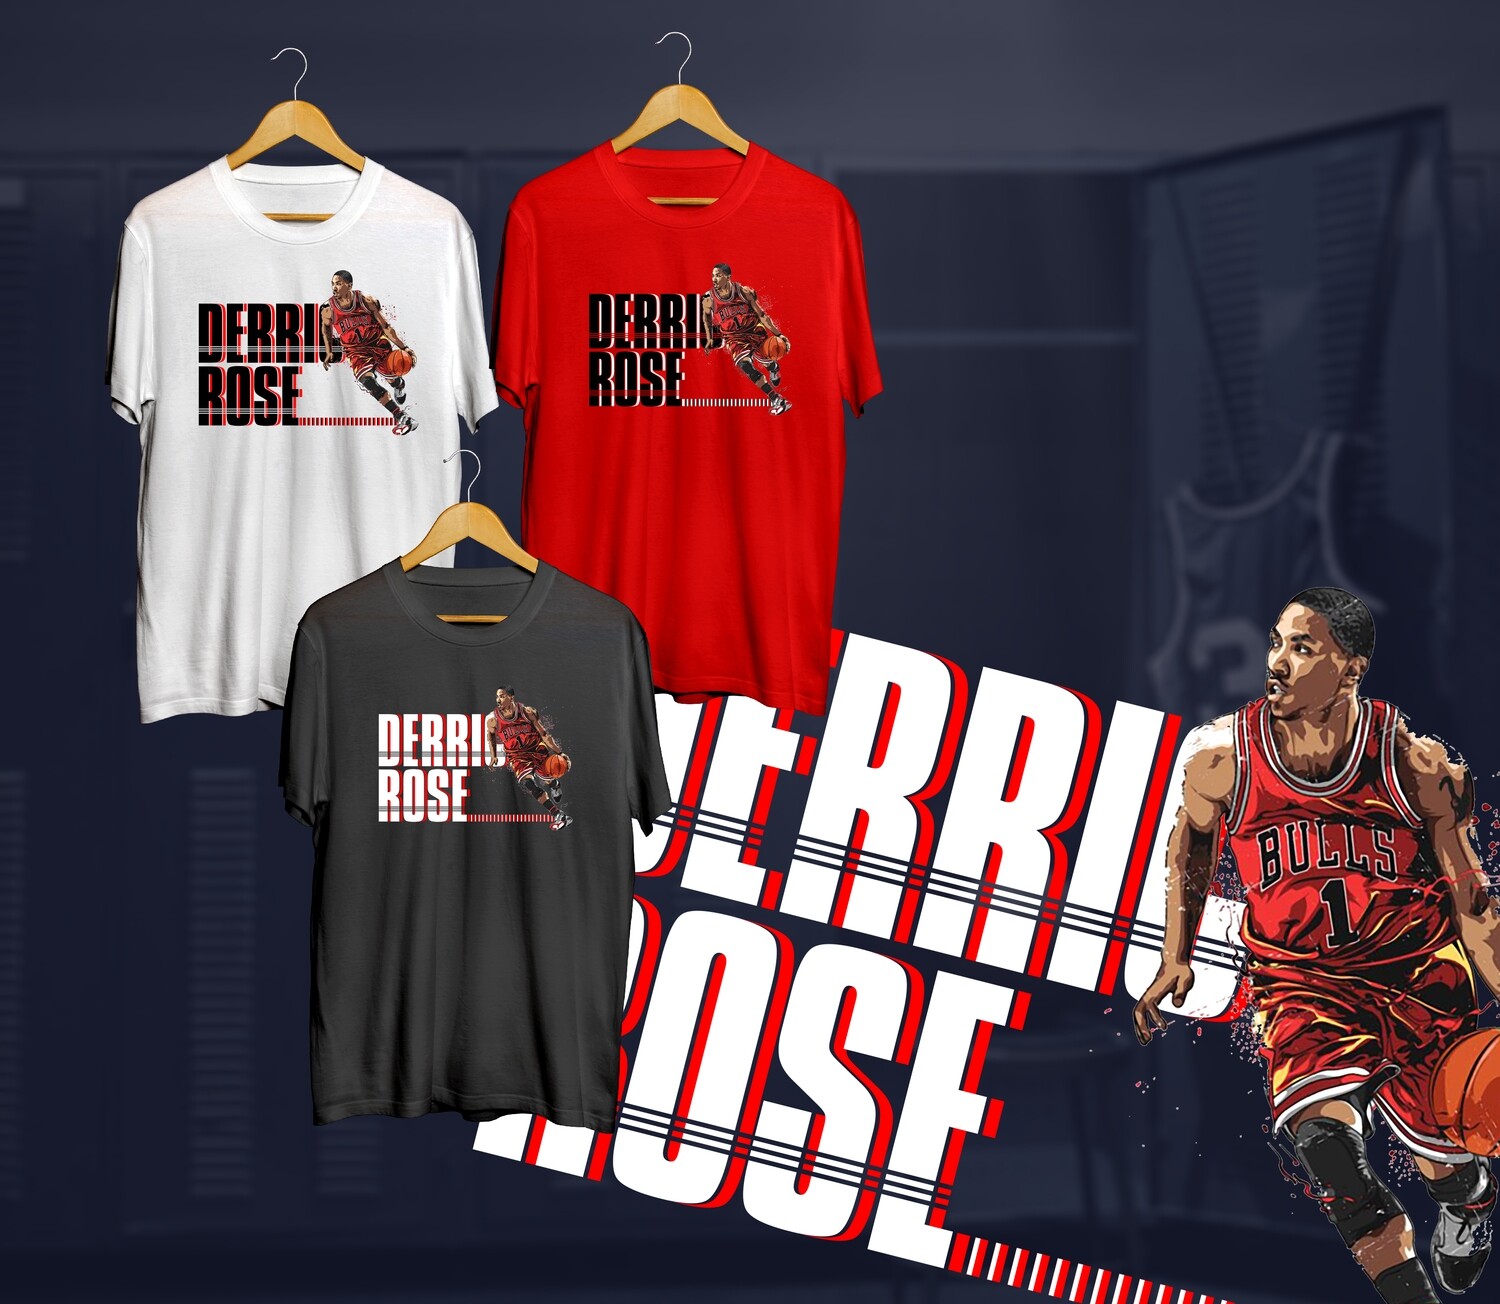 Derrick rose t-shirts - Welcome to our Store - Oncourt Basketball